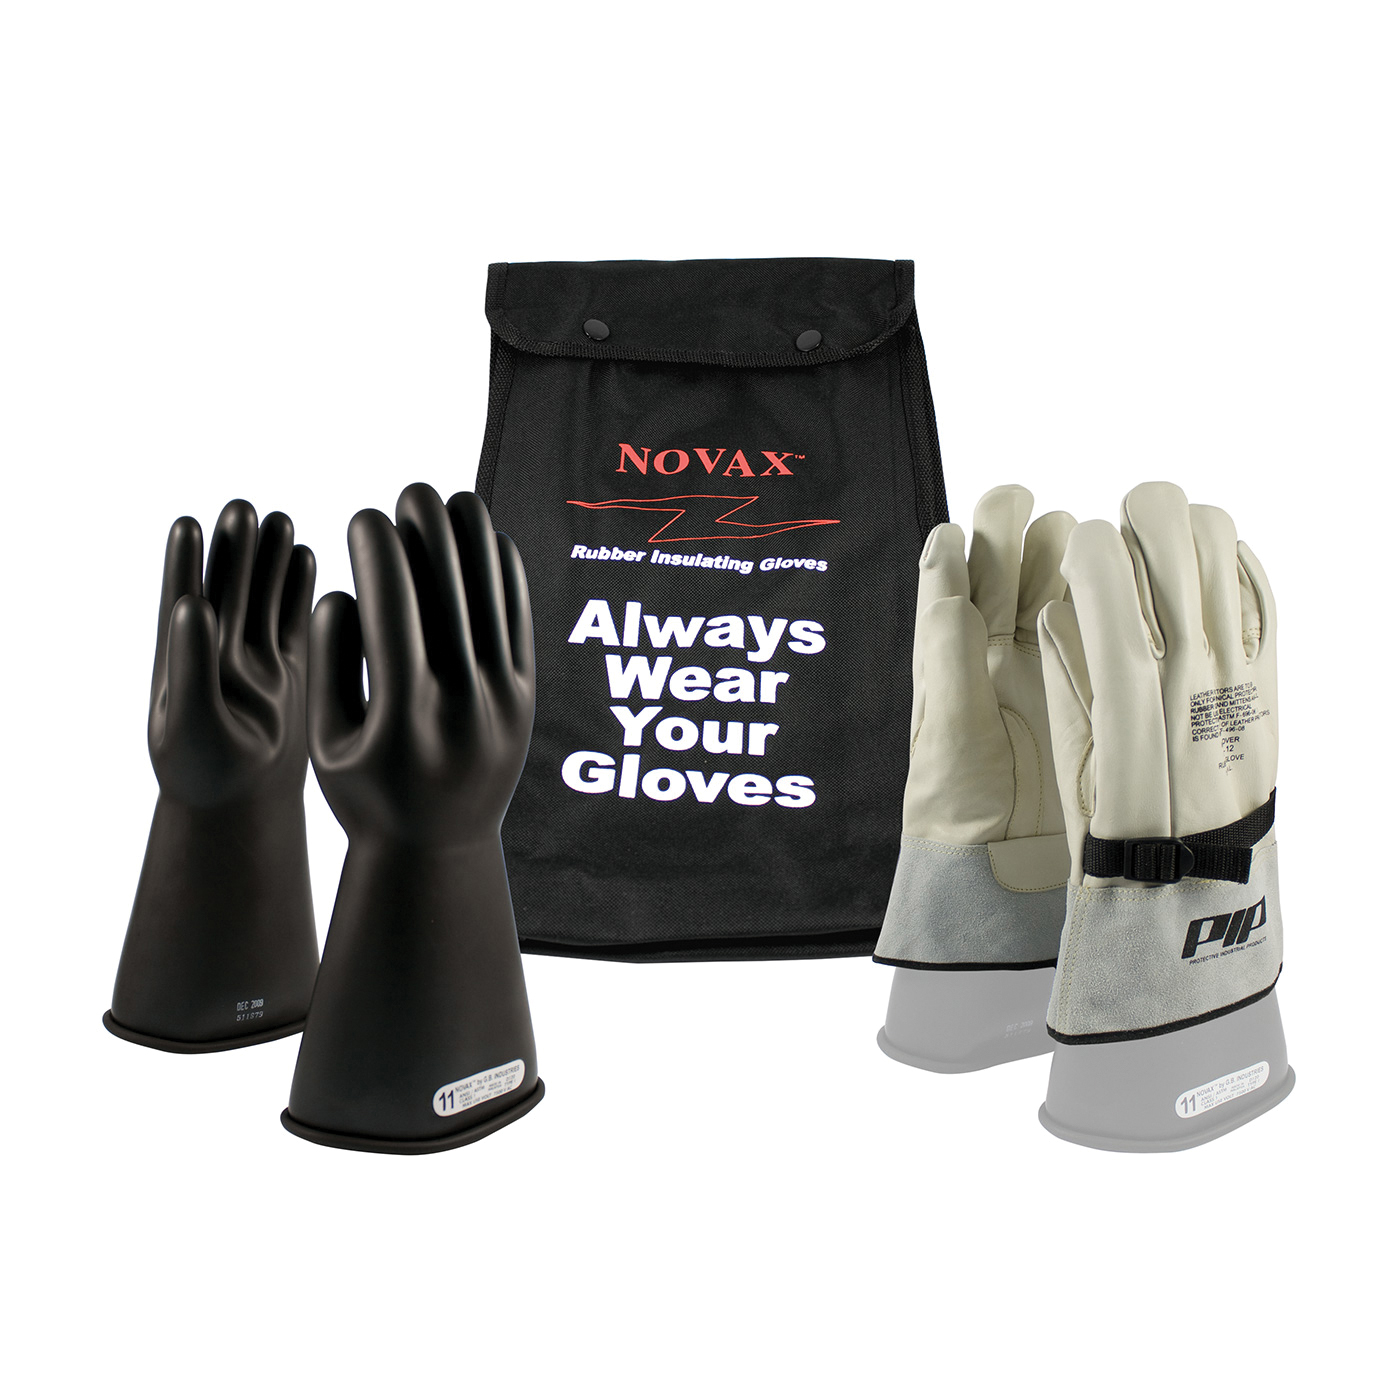 Novax® 150-SK-1/10-KIT Insulating Unisex Electrical Safety Gloves Kit, SZ 10, Cowhide Leather/Natural Rubber, Black/Natural, 14 in L, ASTM Class: Class 1, 7500 VAC, 11250 VDC Max Use Voltage